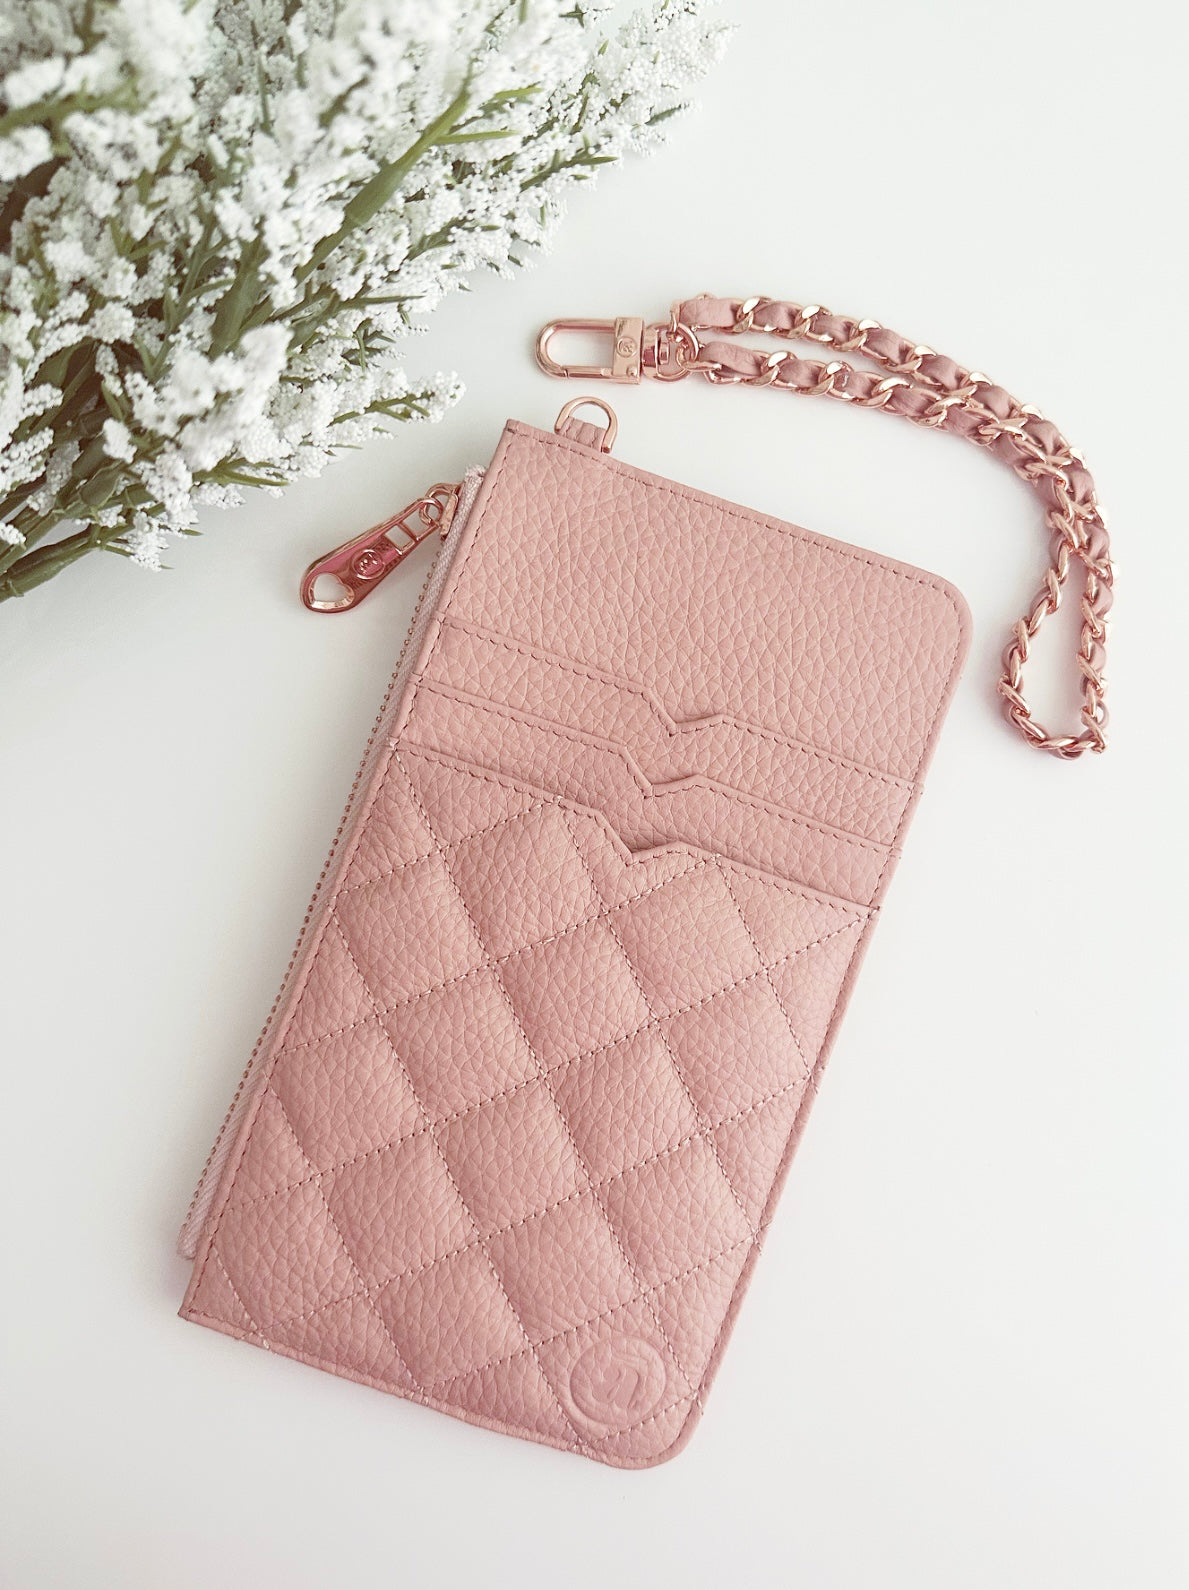 CHANEL 19S Iridescent Pink Caviar Phone Clutch on Chain Detachable Strap  Light Gold Hardware